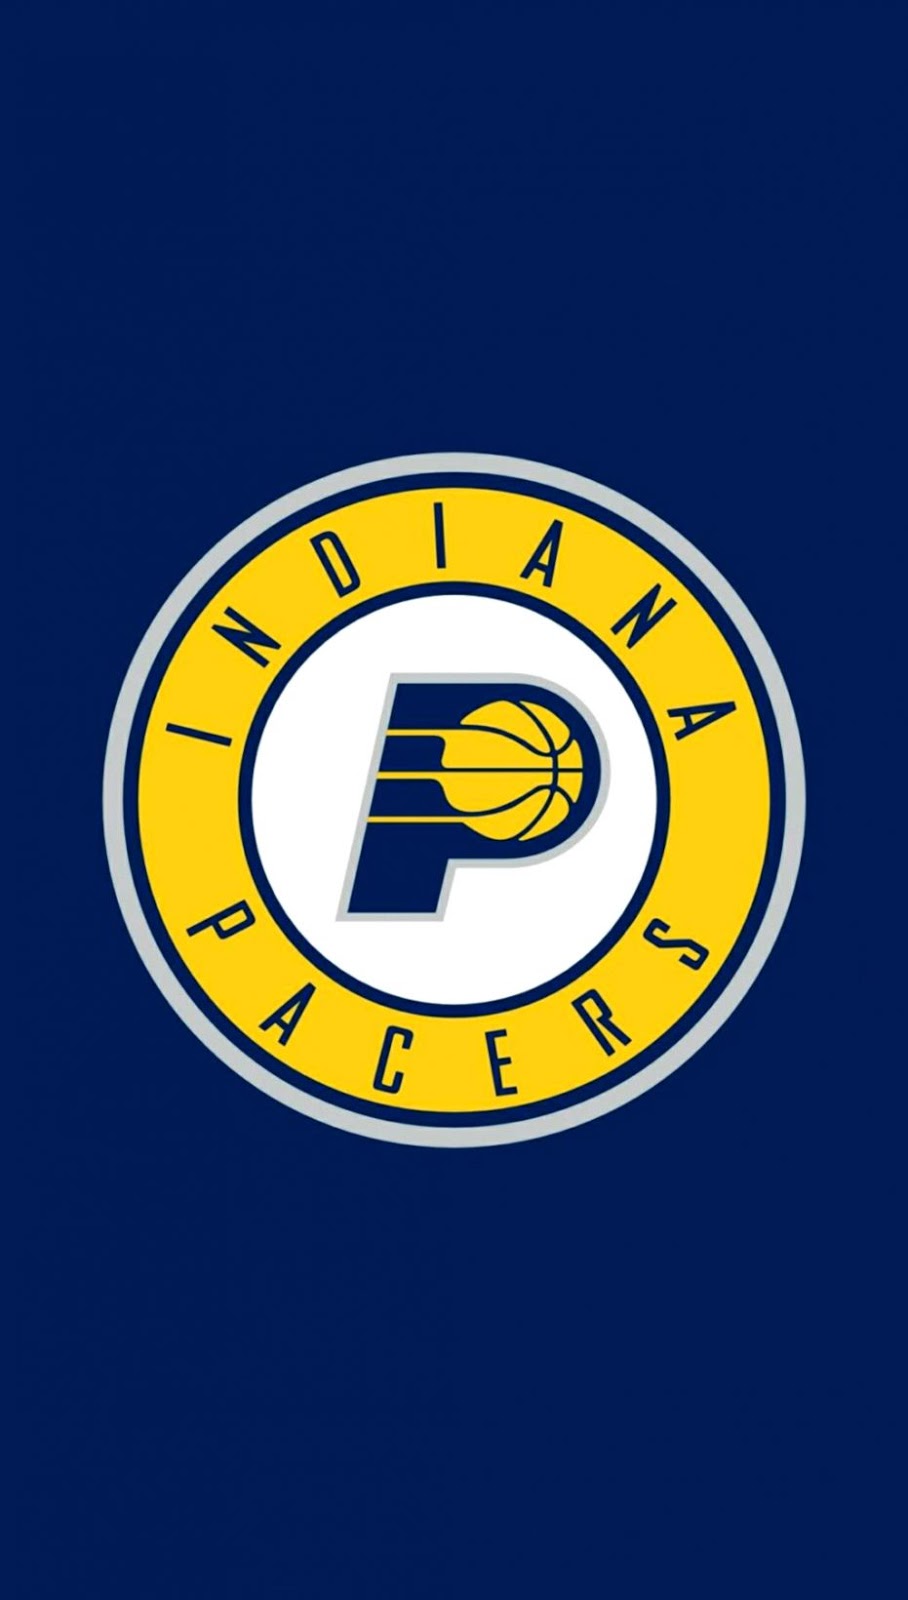 Ndianapacers Nba Wallpaper Indiana Pacers Ve